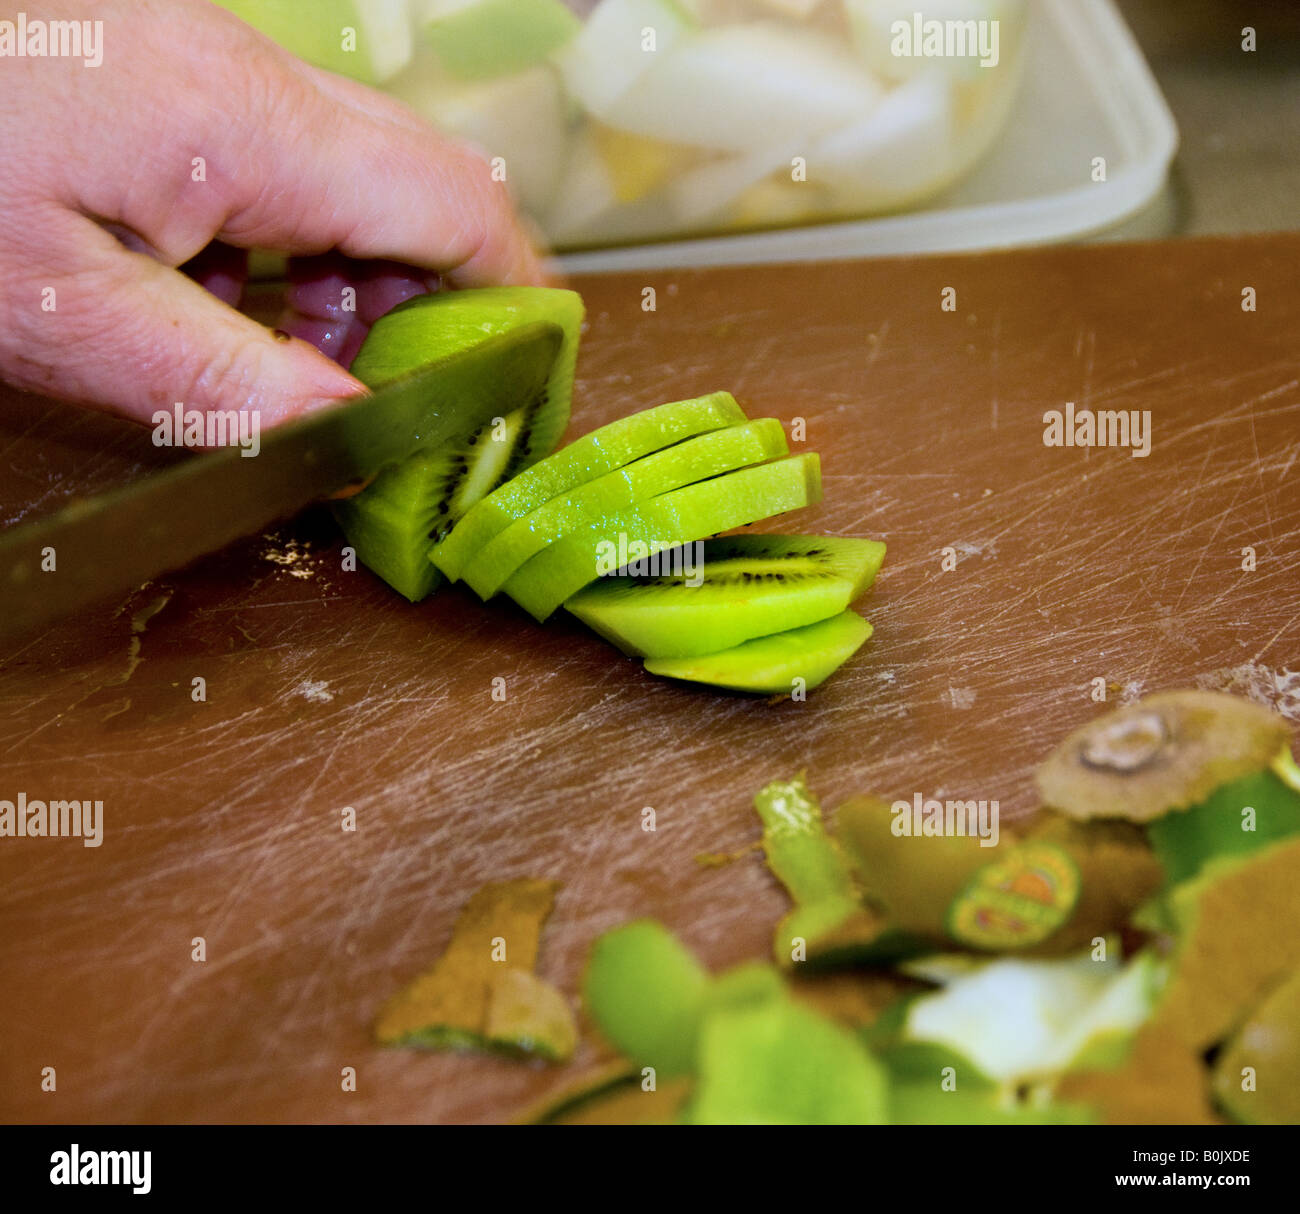 Food preparation - A kiwifruit being sliced. Stock Photo